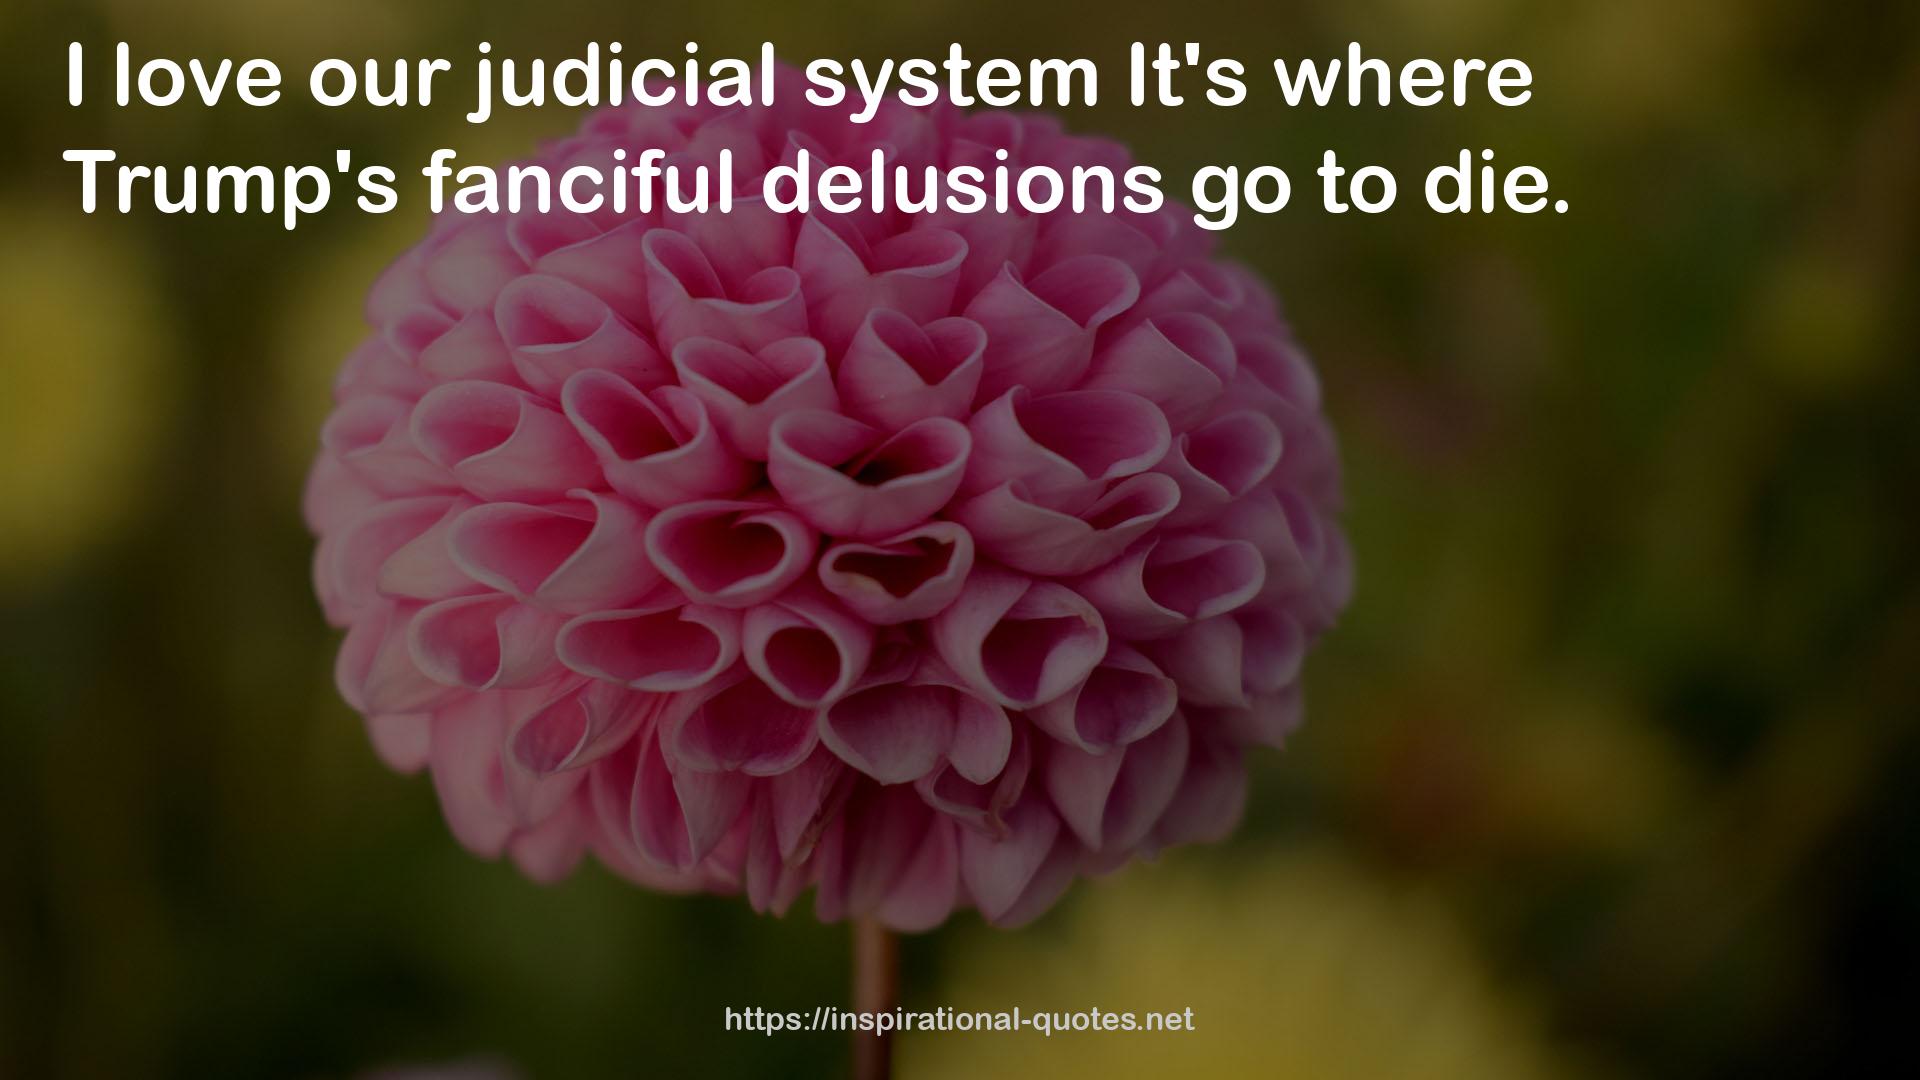 our judicial system  QUOTES